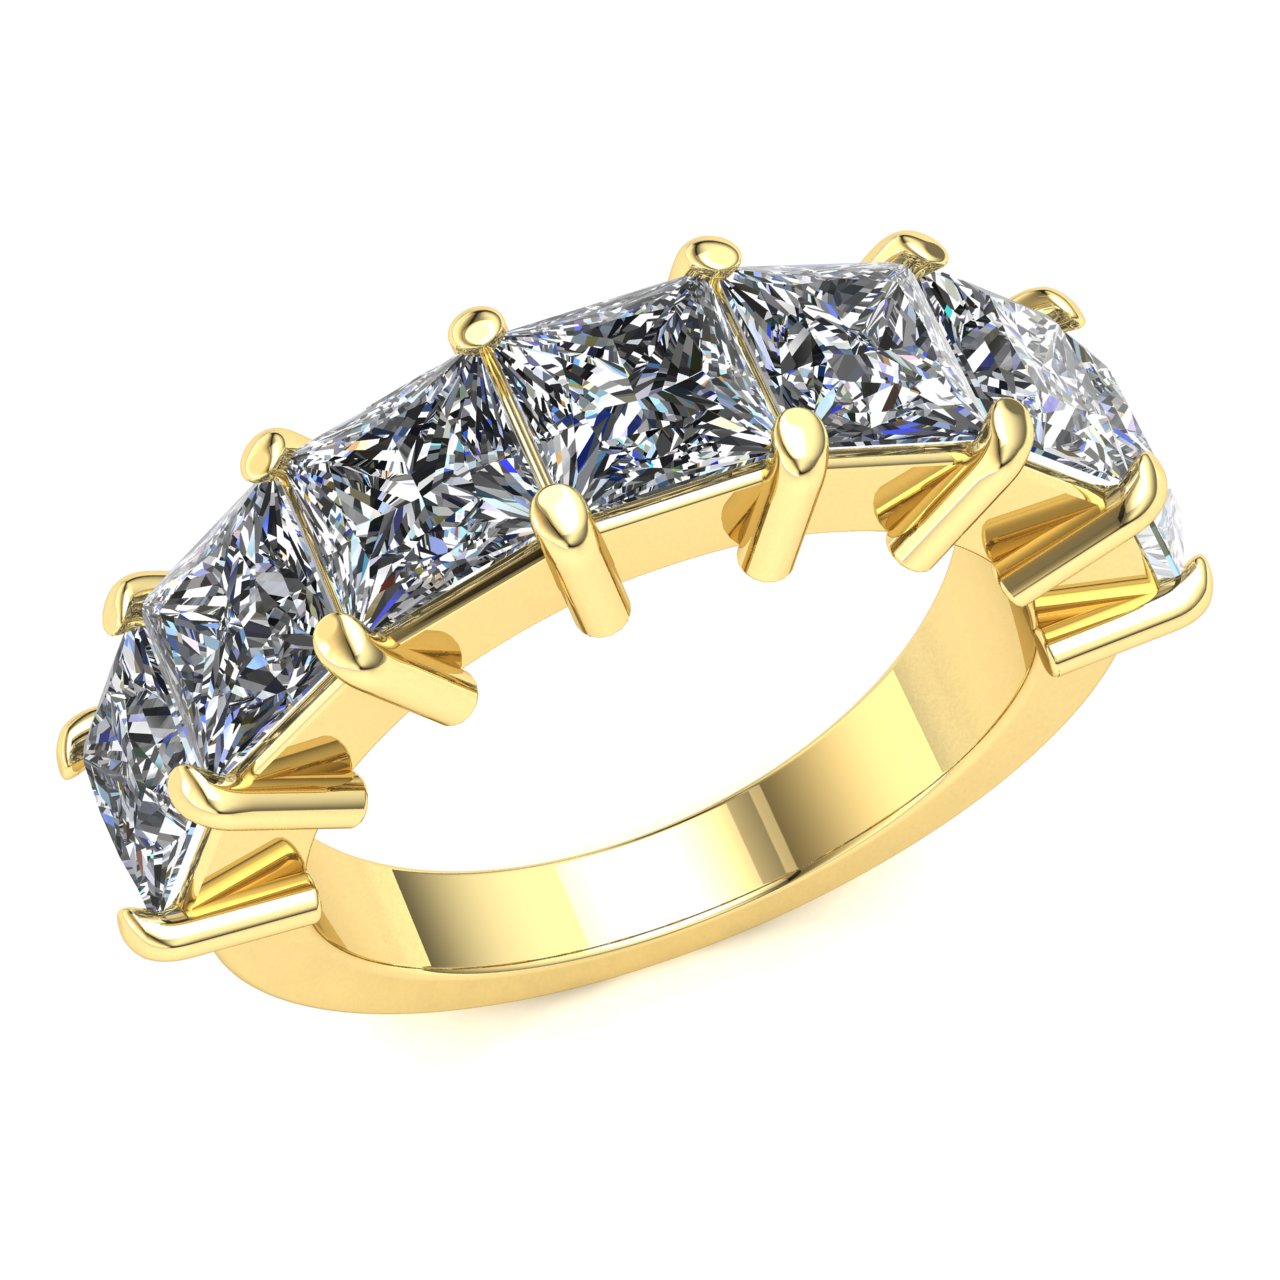 Jewel We Sell Natural 3.6carat Princess Cut Diamond Ladies Prong Set Half  Eternity Band Ring Solid 14k White, Yellow or Rose Gold GH SI1